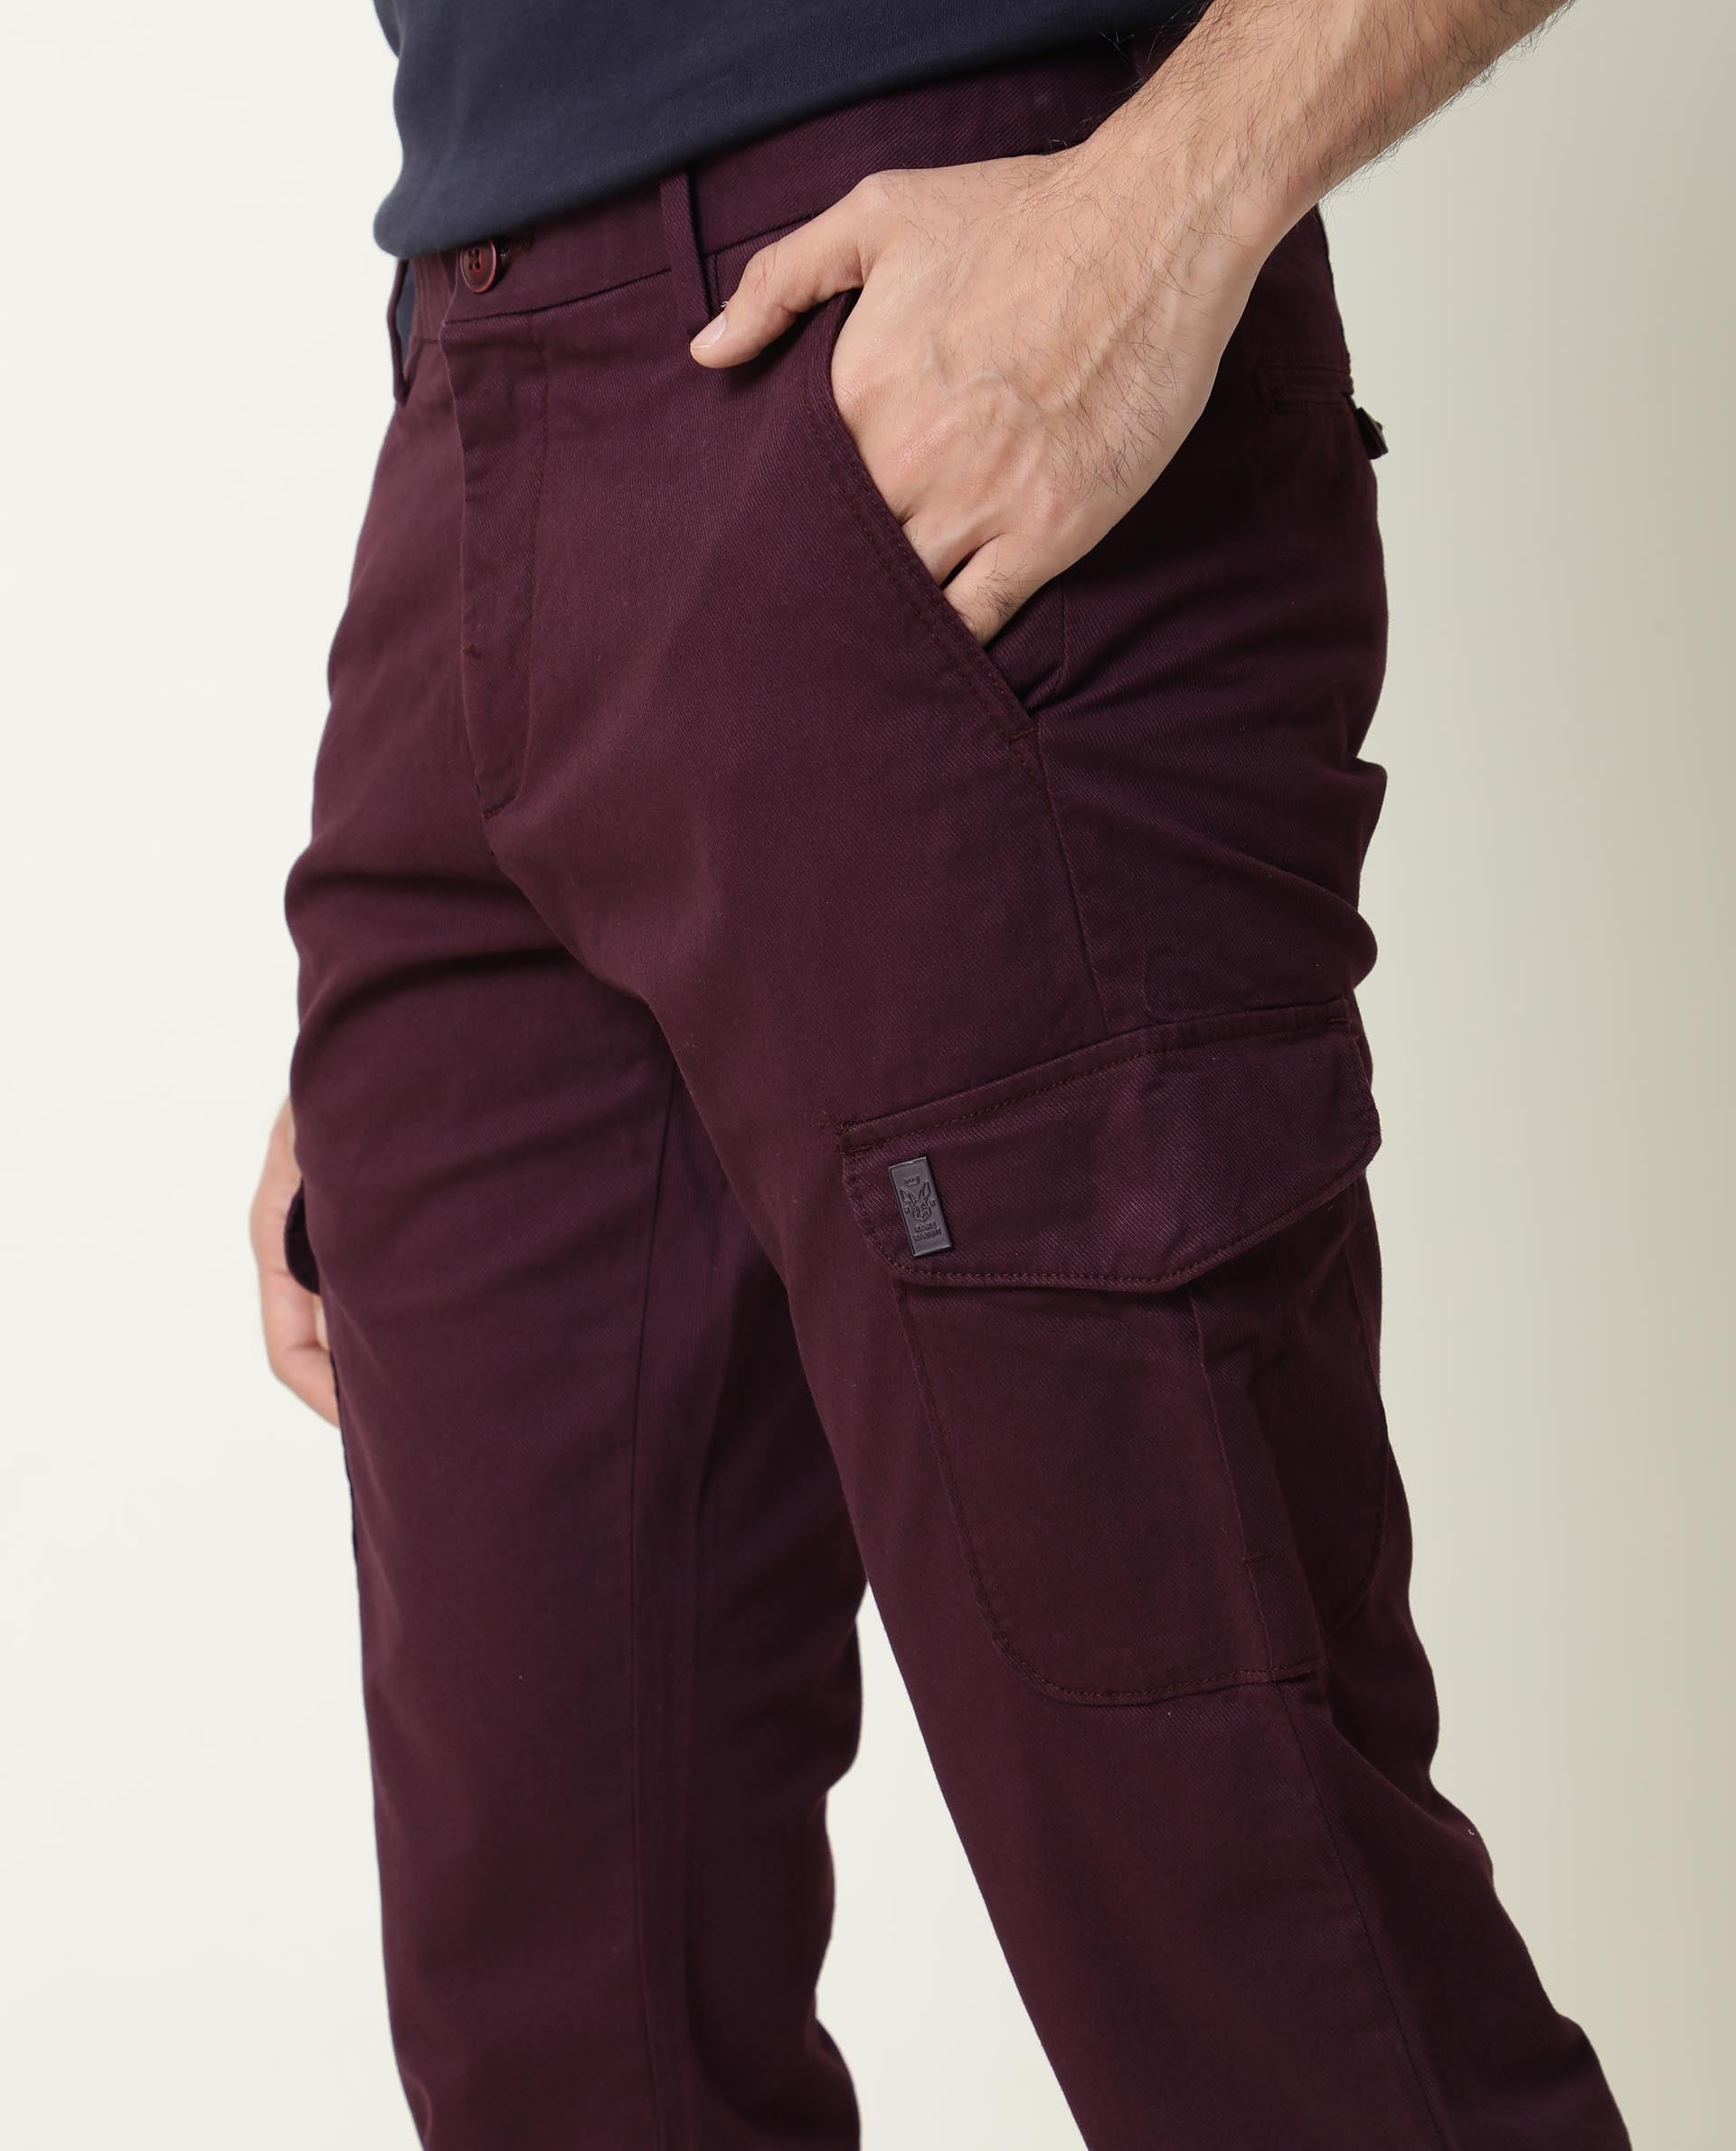 Maroon pant men outfit  Maroon pants Mens outfits Pants outfit men